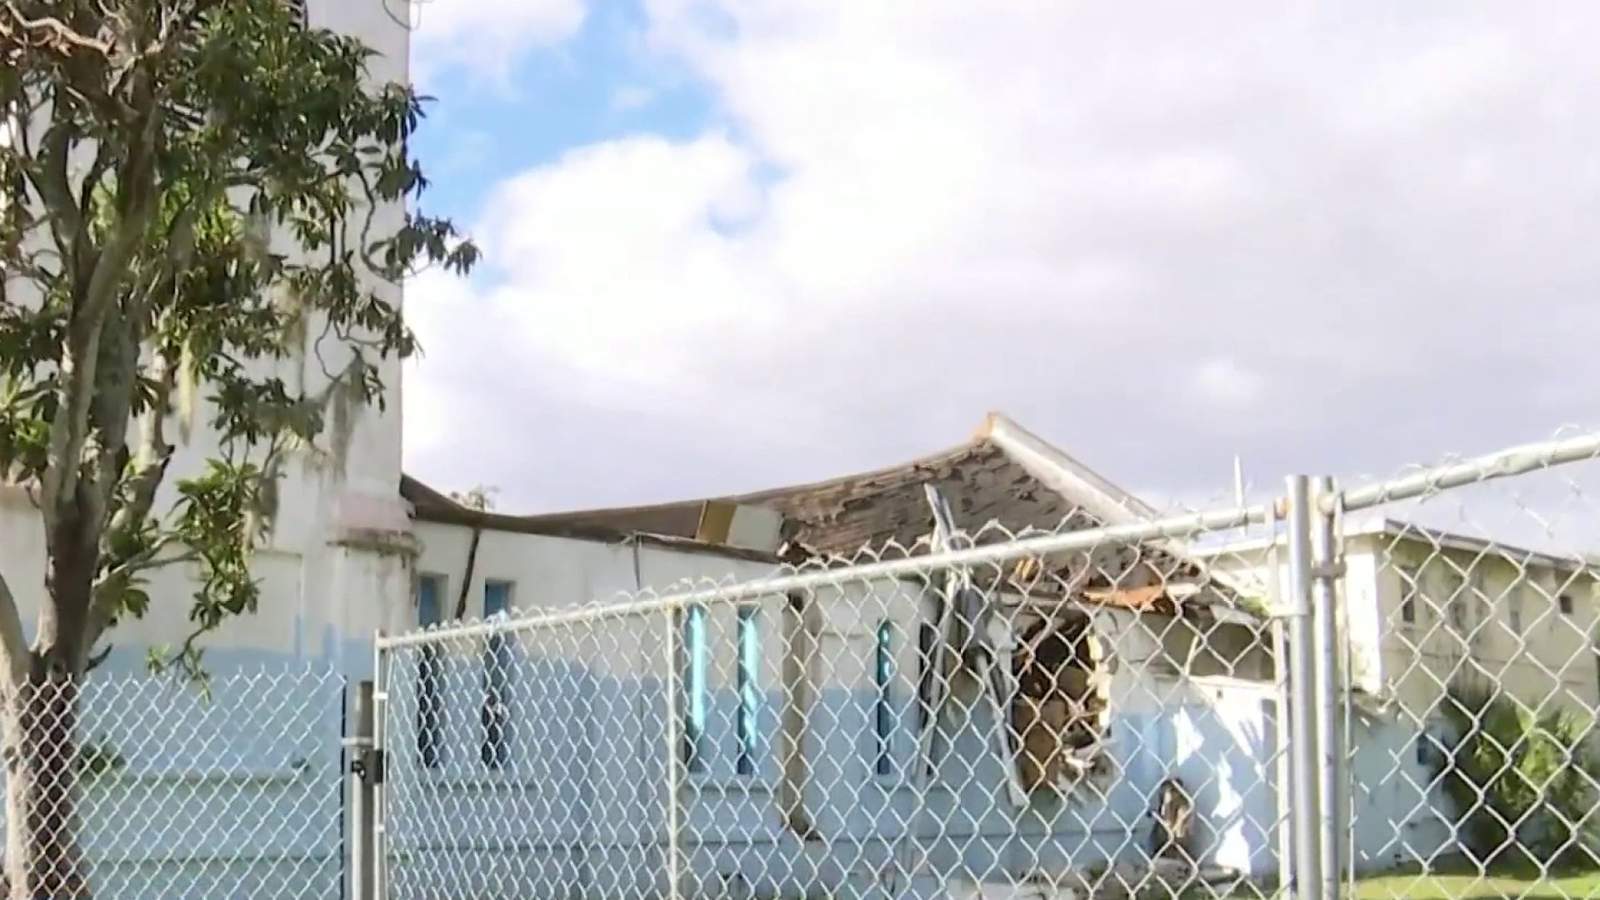 Evaluation of historic Orlando church’s collapsed roof could cost $17,000, contractors say